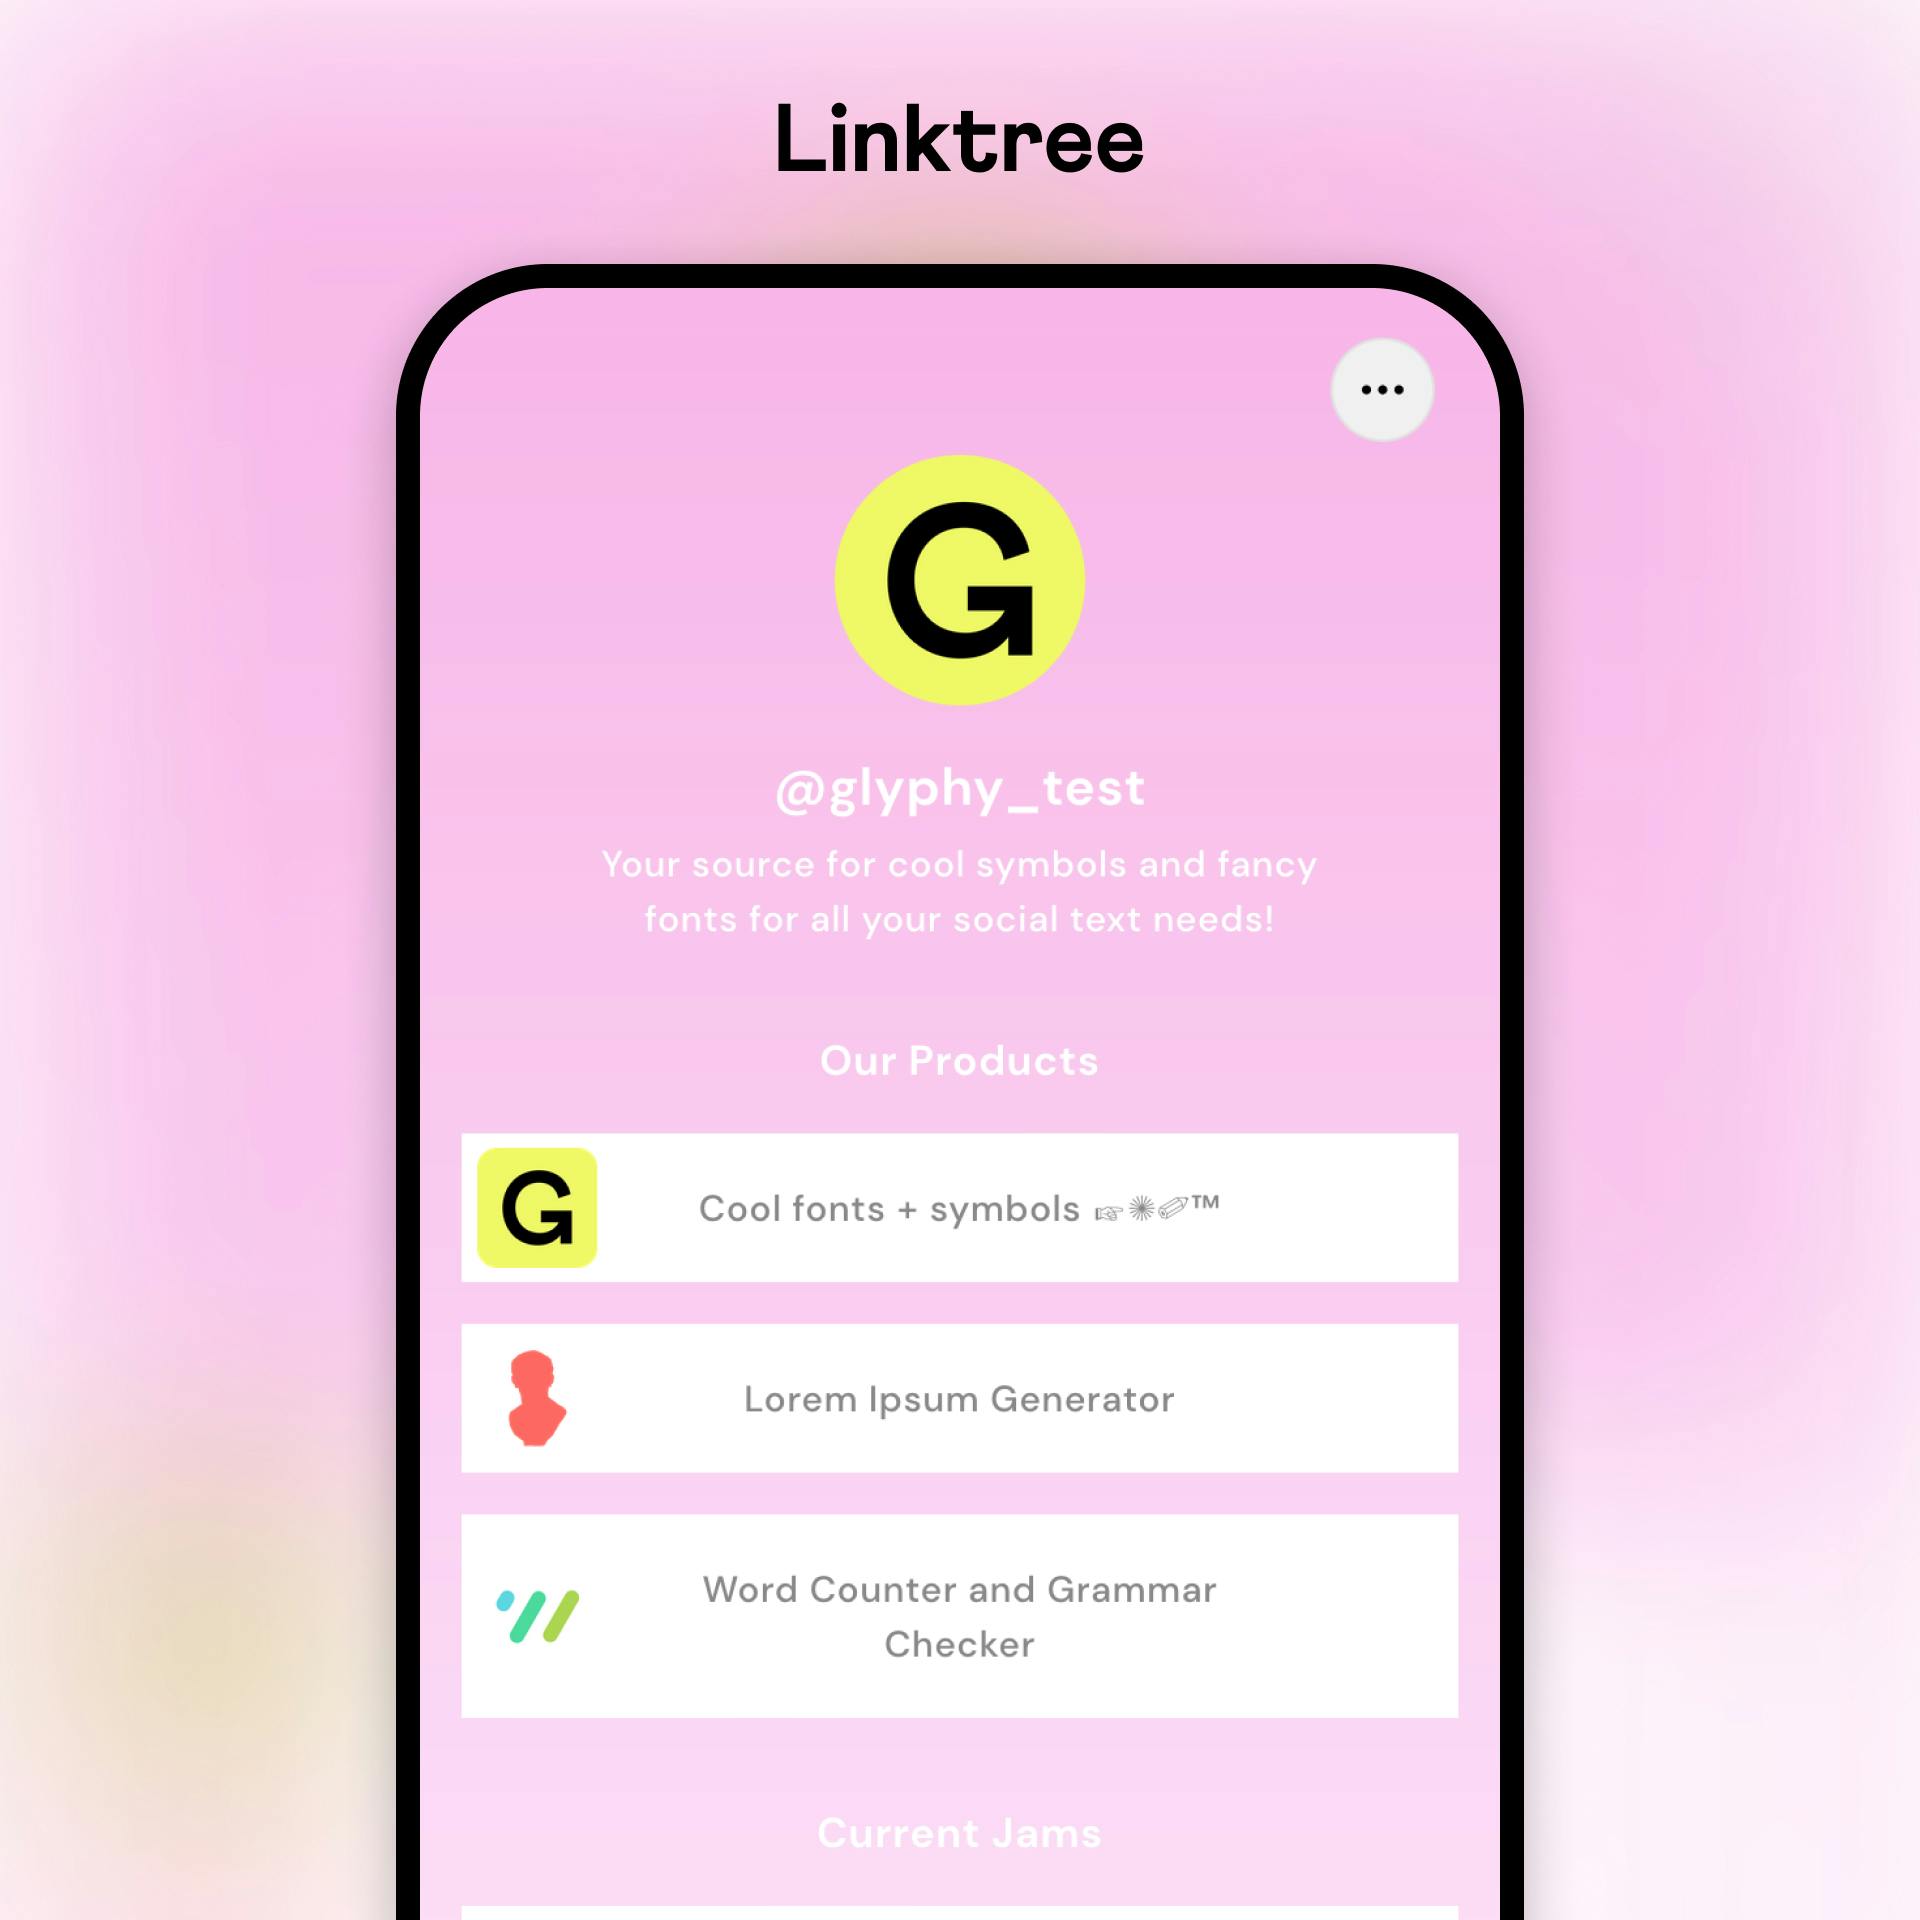 Linktree example profile on a mobile device